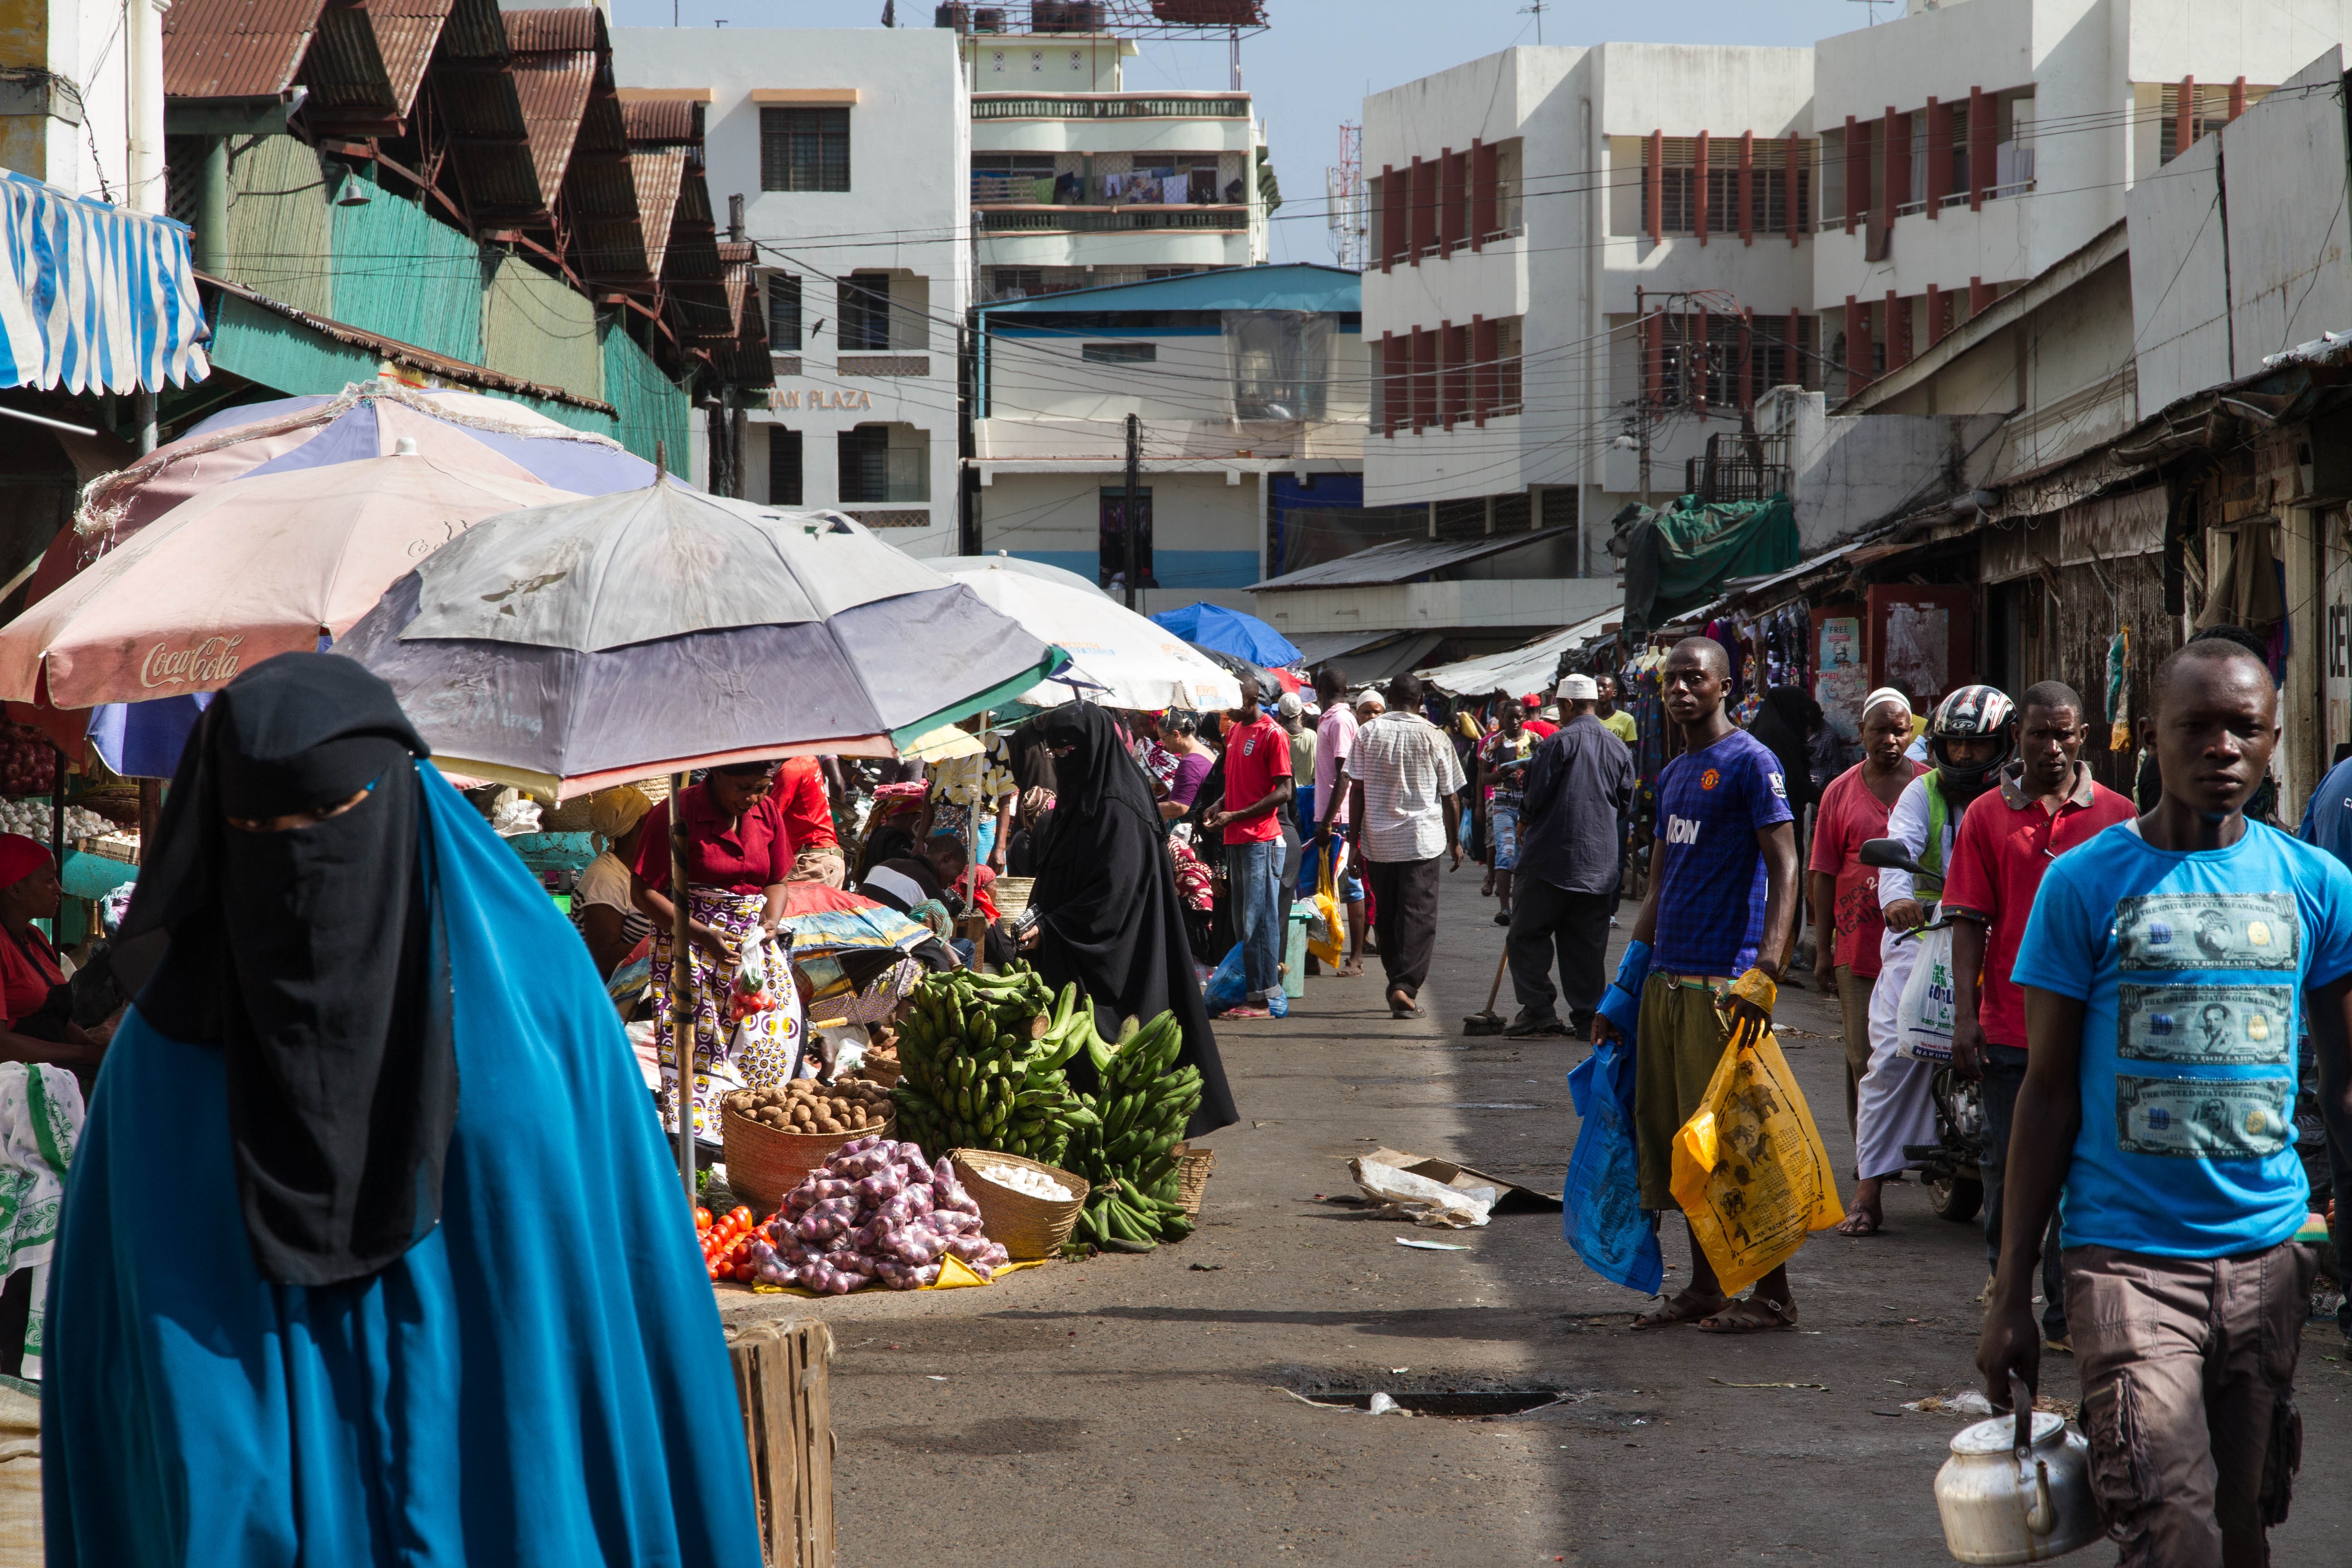 A market street in Kenya with various traders and pedestrians